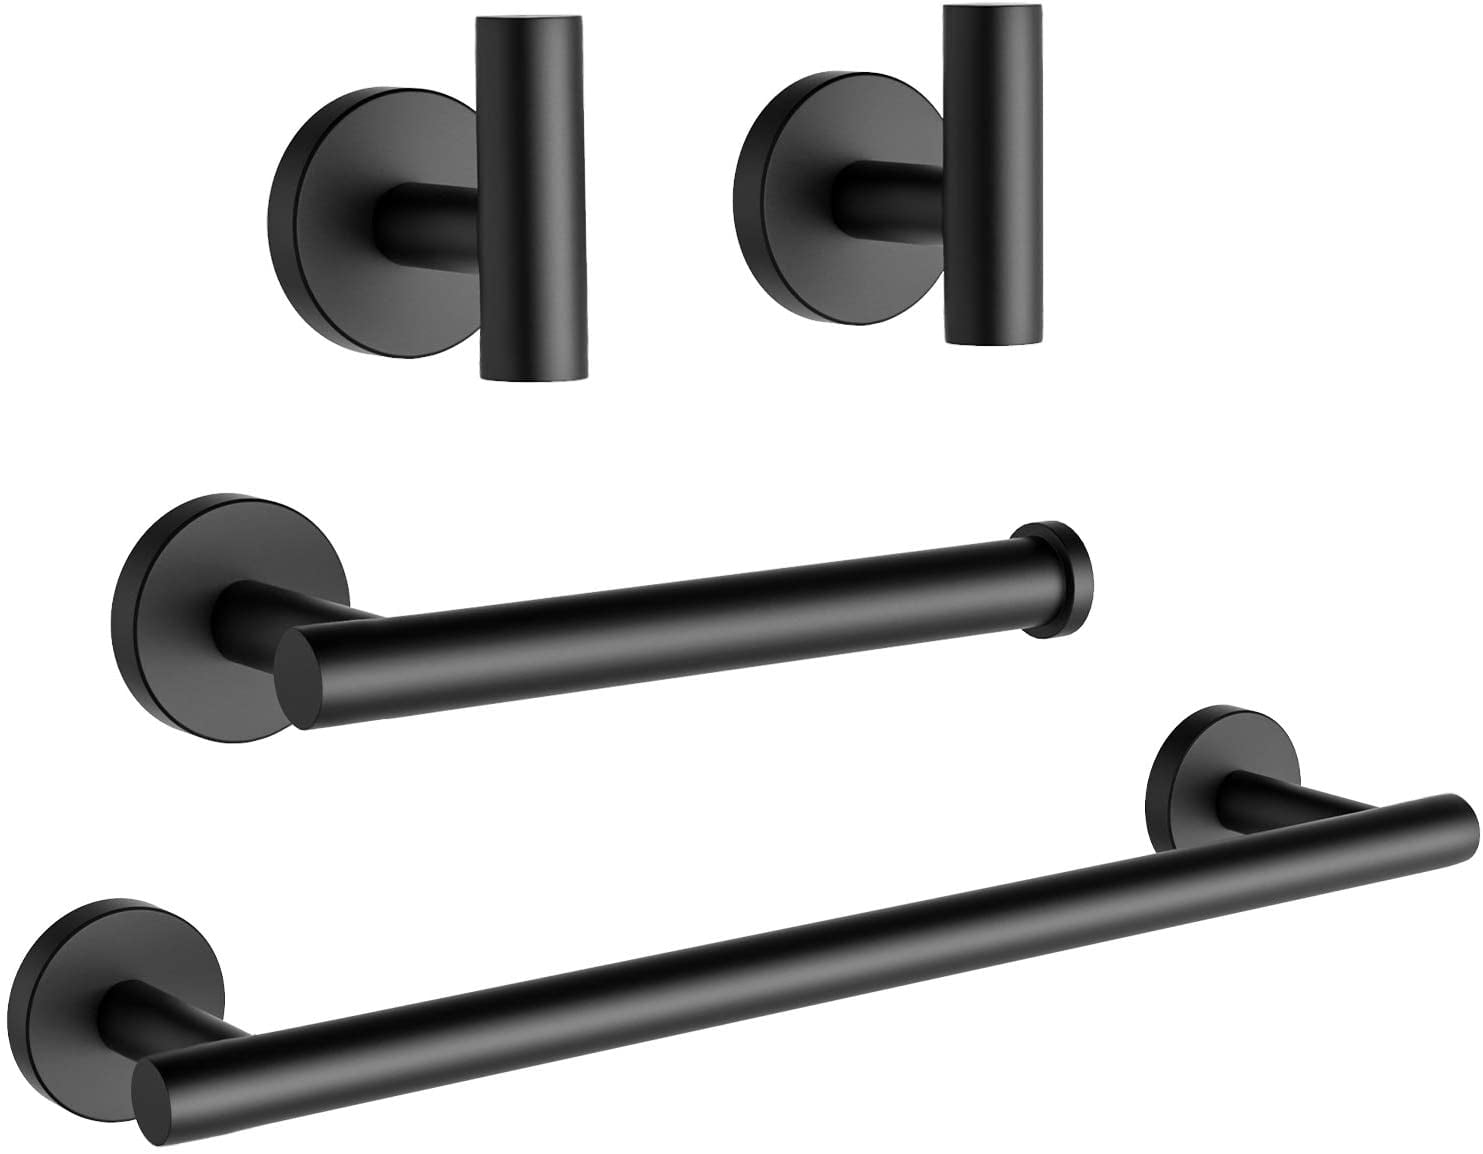 Tudoccy 5-Pieces Matte Black Bathroom Hardware Set SUS304 Stainless Steel  Round Wall Mounted - Includes 16 Hand Towel Bar, Toilet Paper Holder, 3